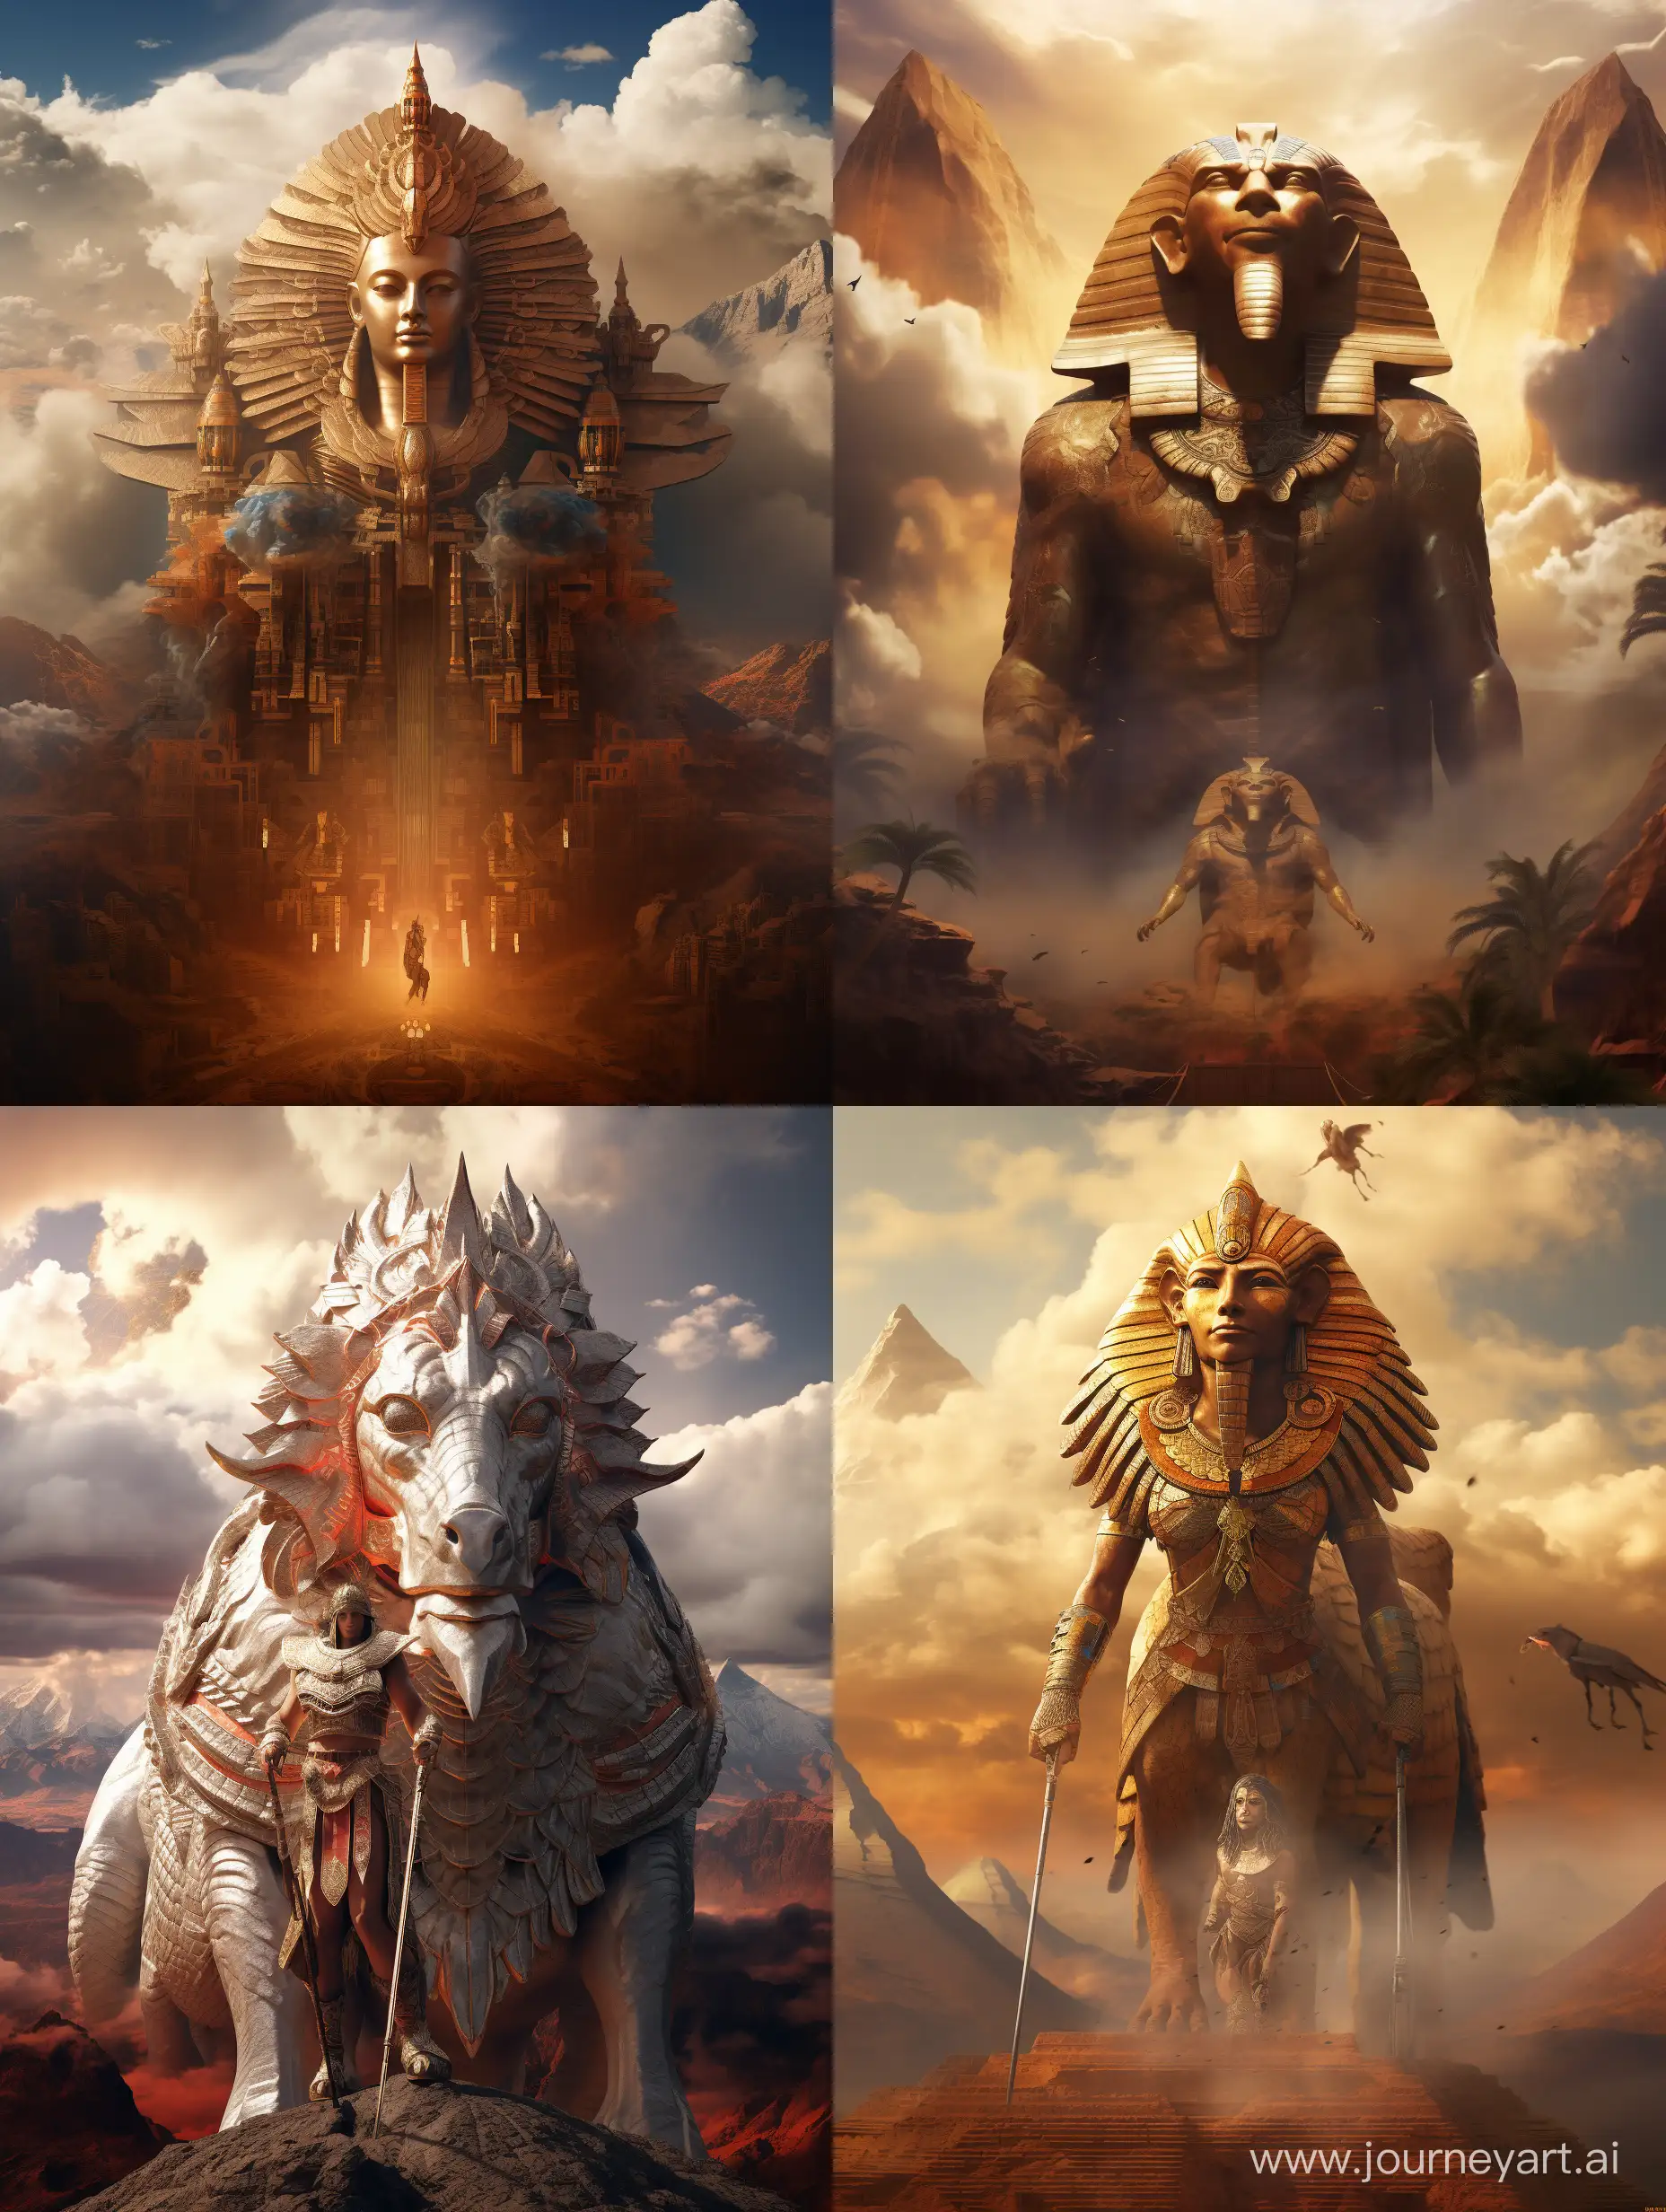 Epic-Pharaonic-Legend-Conquering-the-Sky